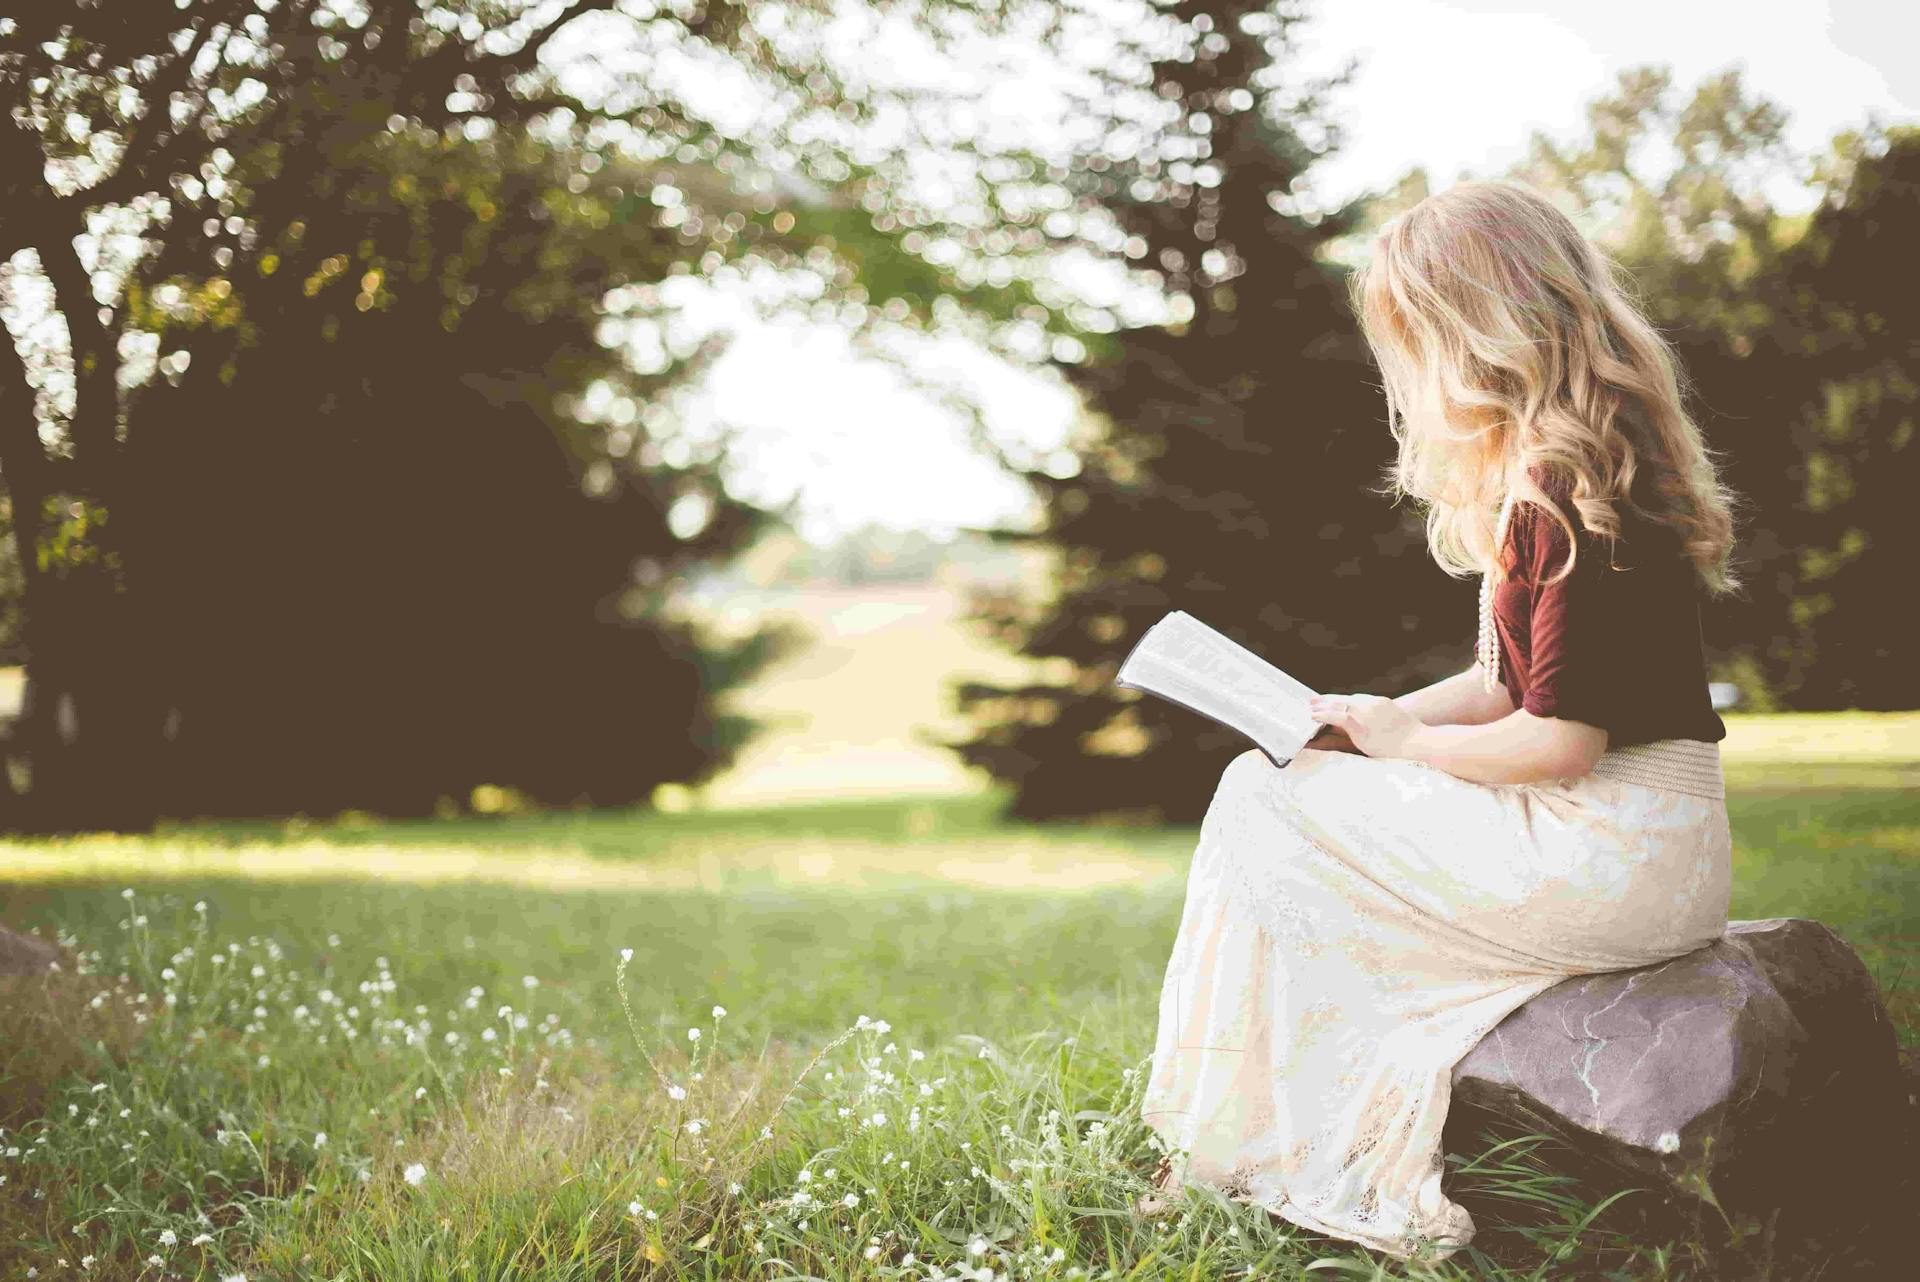 Happiful Reads: 3 Inspiring Books for Busy Young Minds